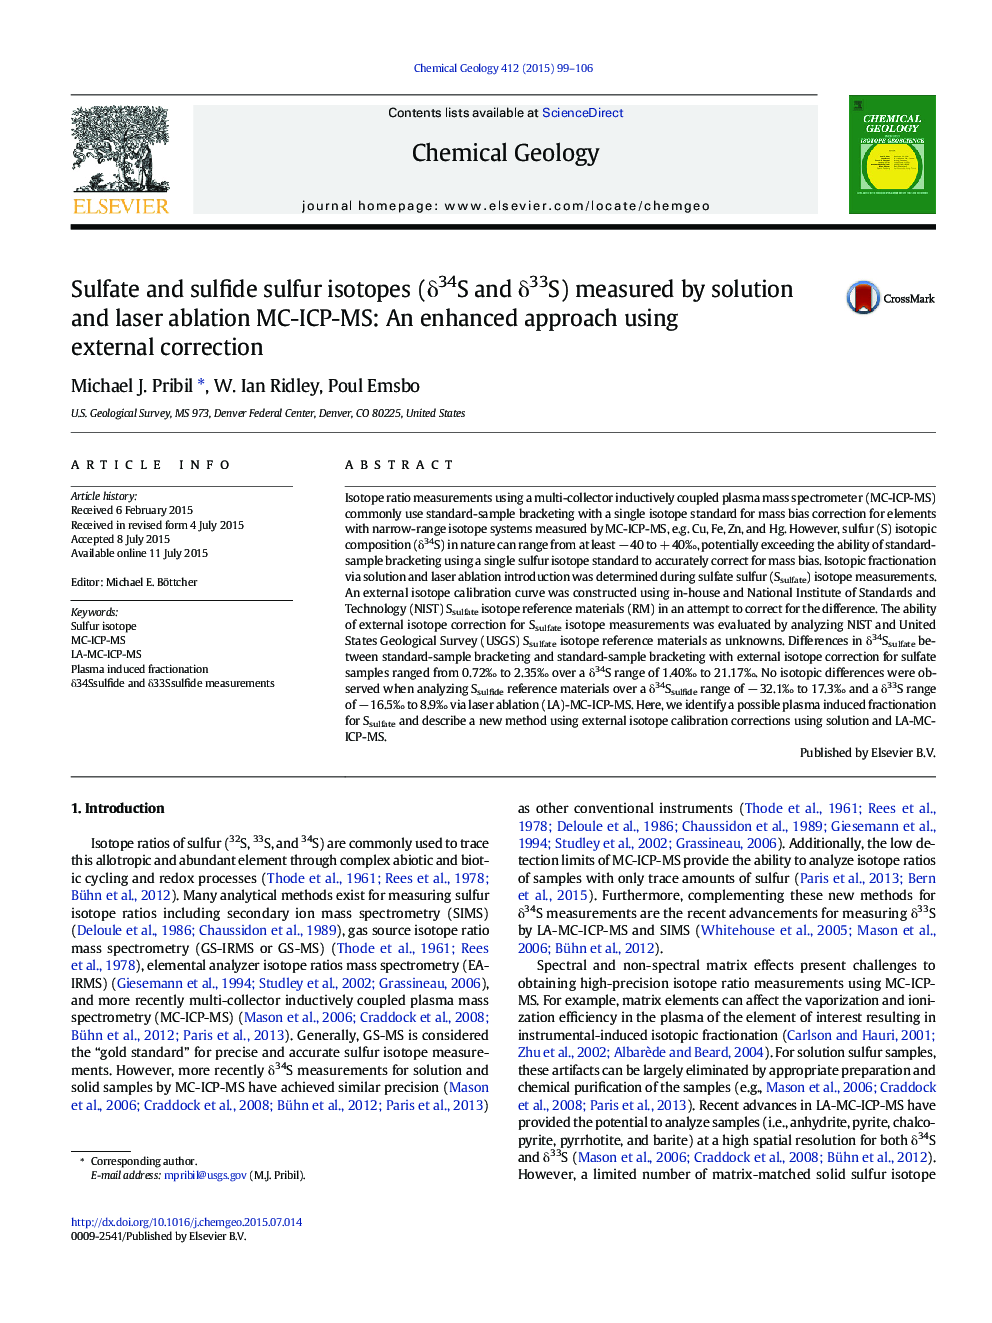 Sulfate and sulfide sulfur isotopes (δ34S and δ33S) measured by solution and laser ablation MC-ICP-MS: An enhanced approach using external correction